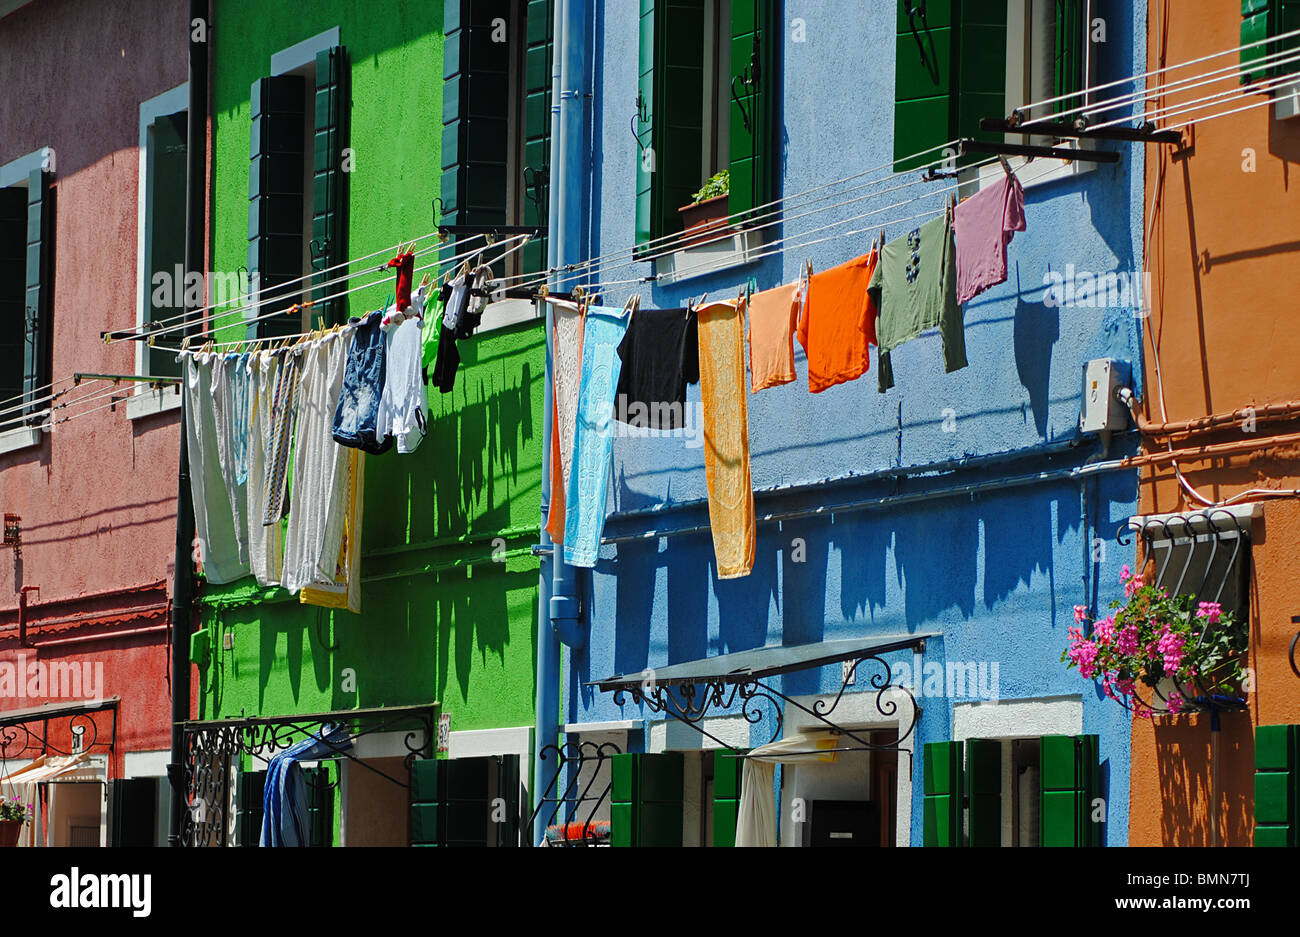 Clothes line and colorful houses on Burano, italy Stock Photo